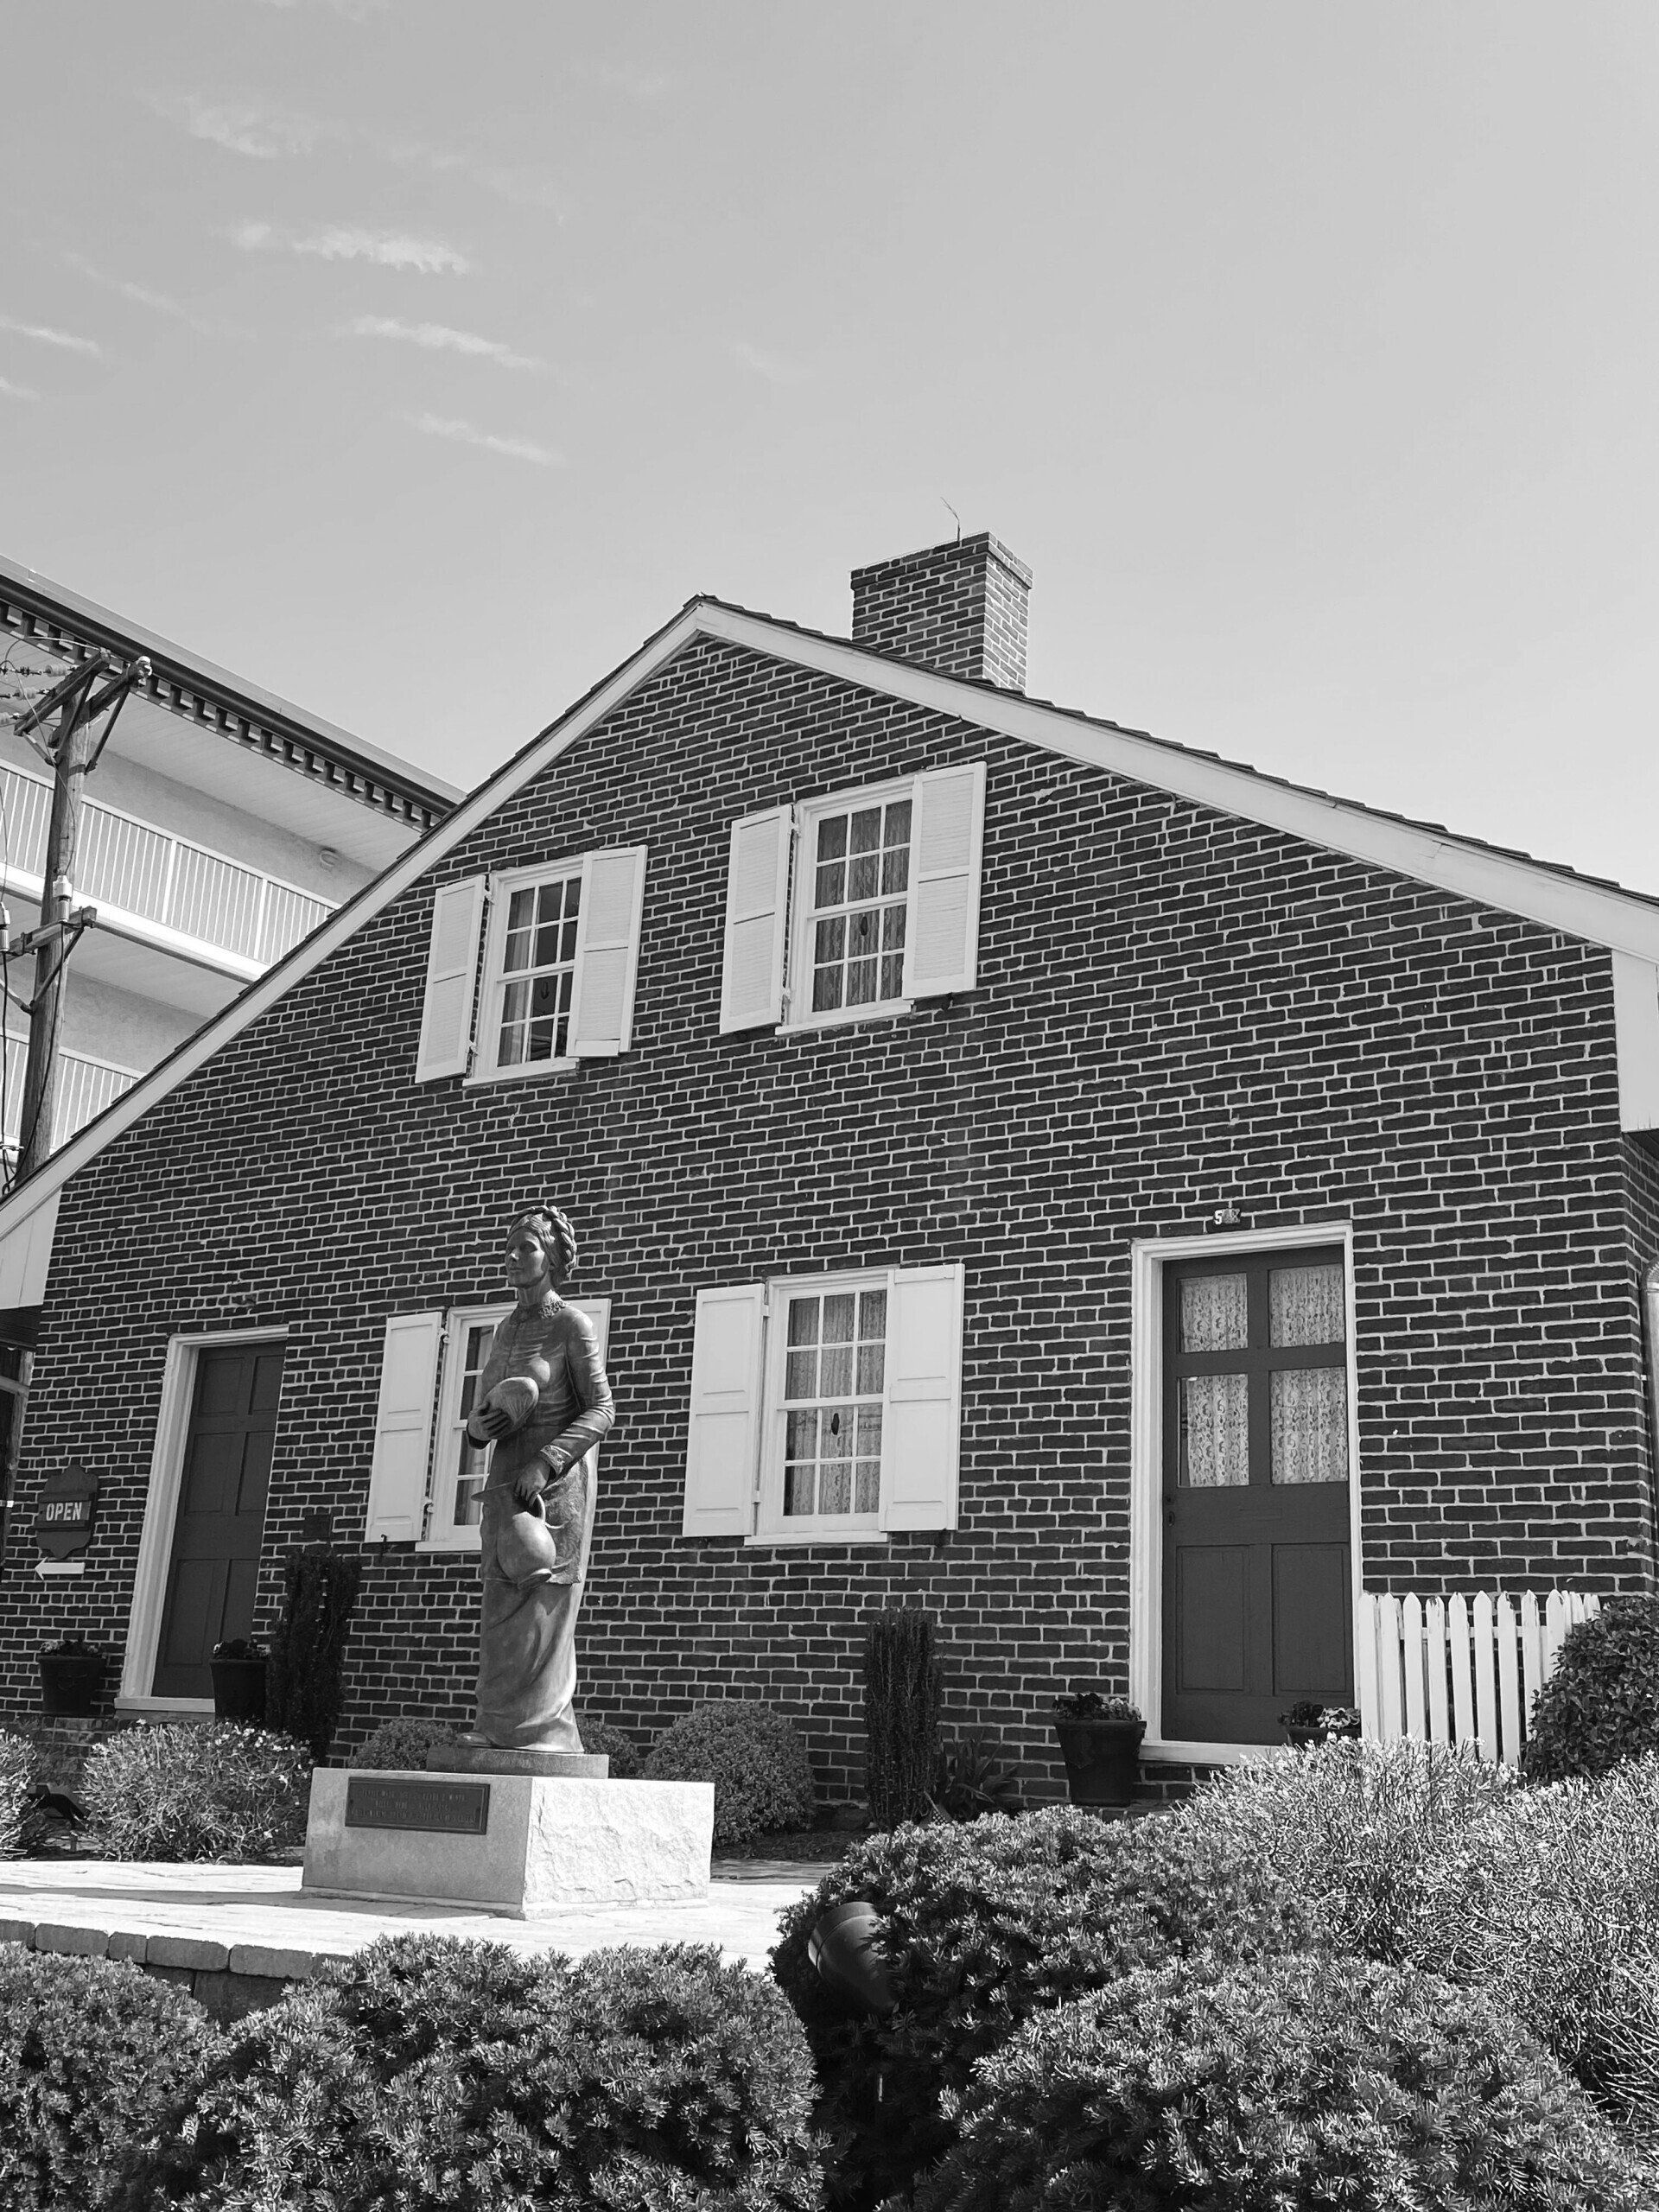 a black and white photo of a brick house with a statue in front of it